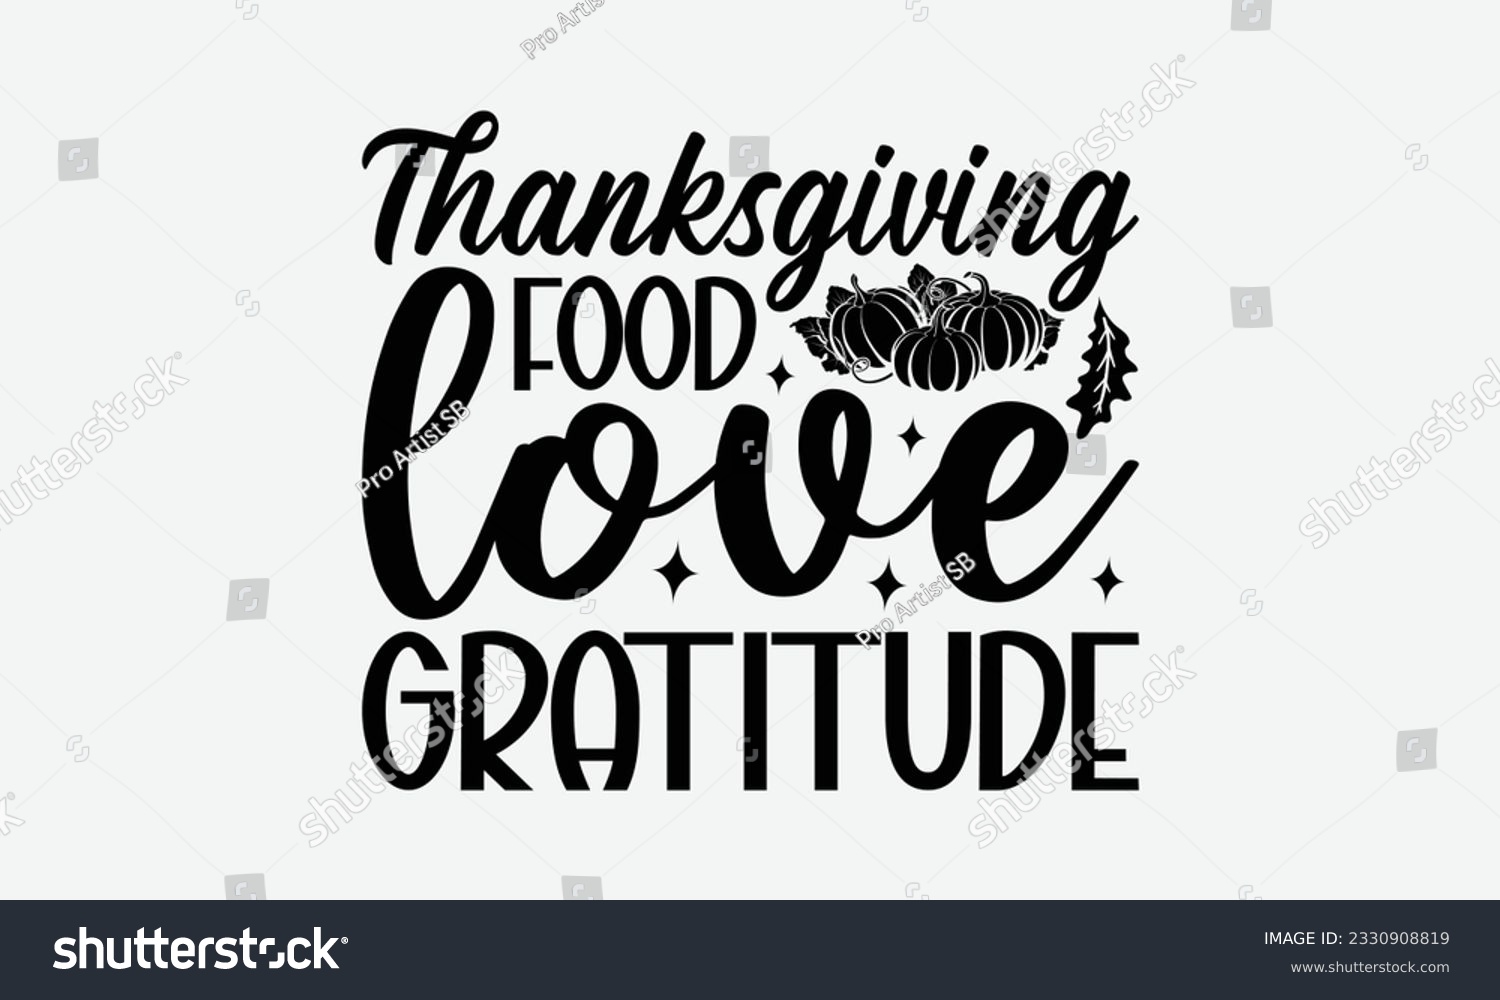 SVG of Thanksgiving Food Love Gratitude - Thanksgiving T-shirt Design Template, Happy Turkey Day SVG Quotes, Hand Drawn Lettering Phrase Isolated On White Background. svg